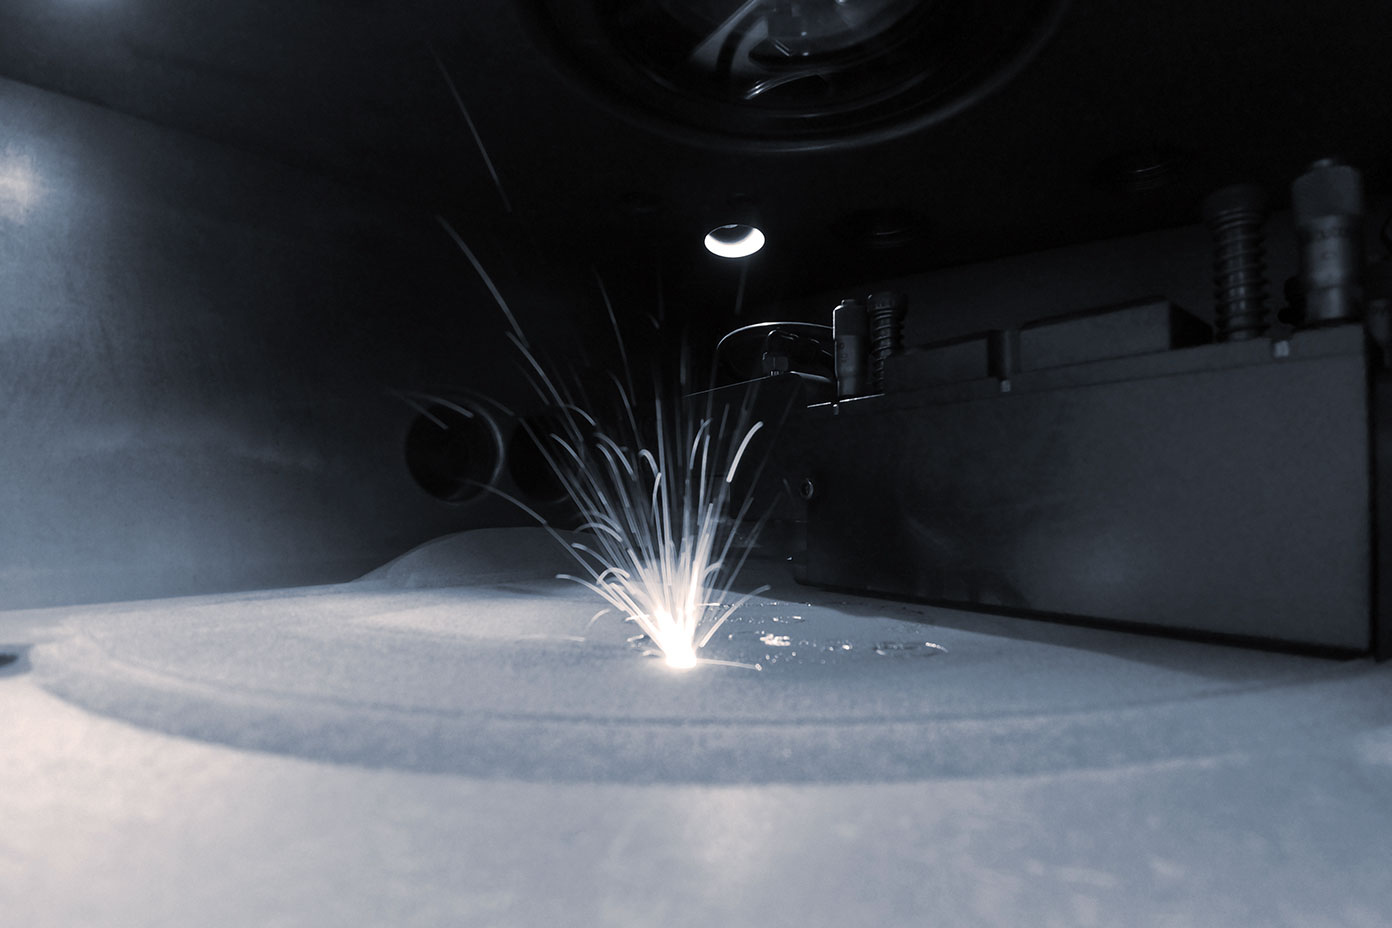 Additive manufacturing processing being used to fabricate a metal part